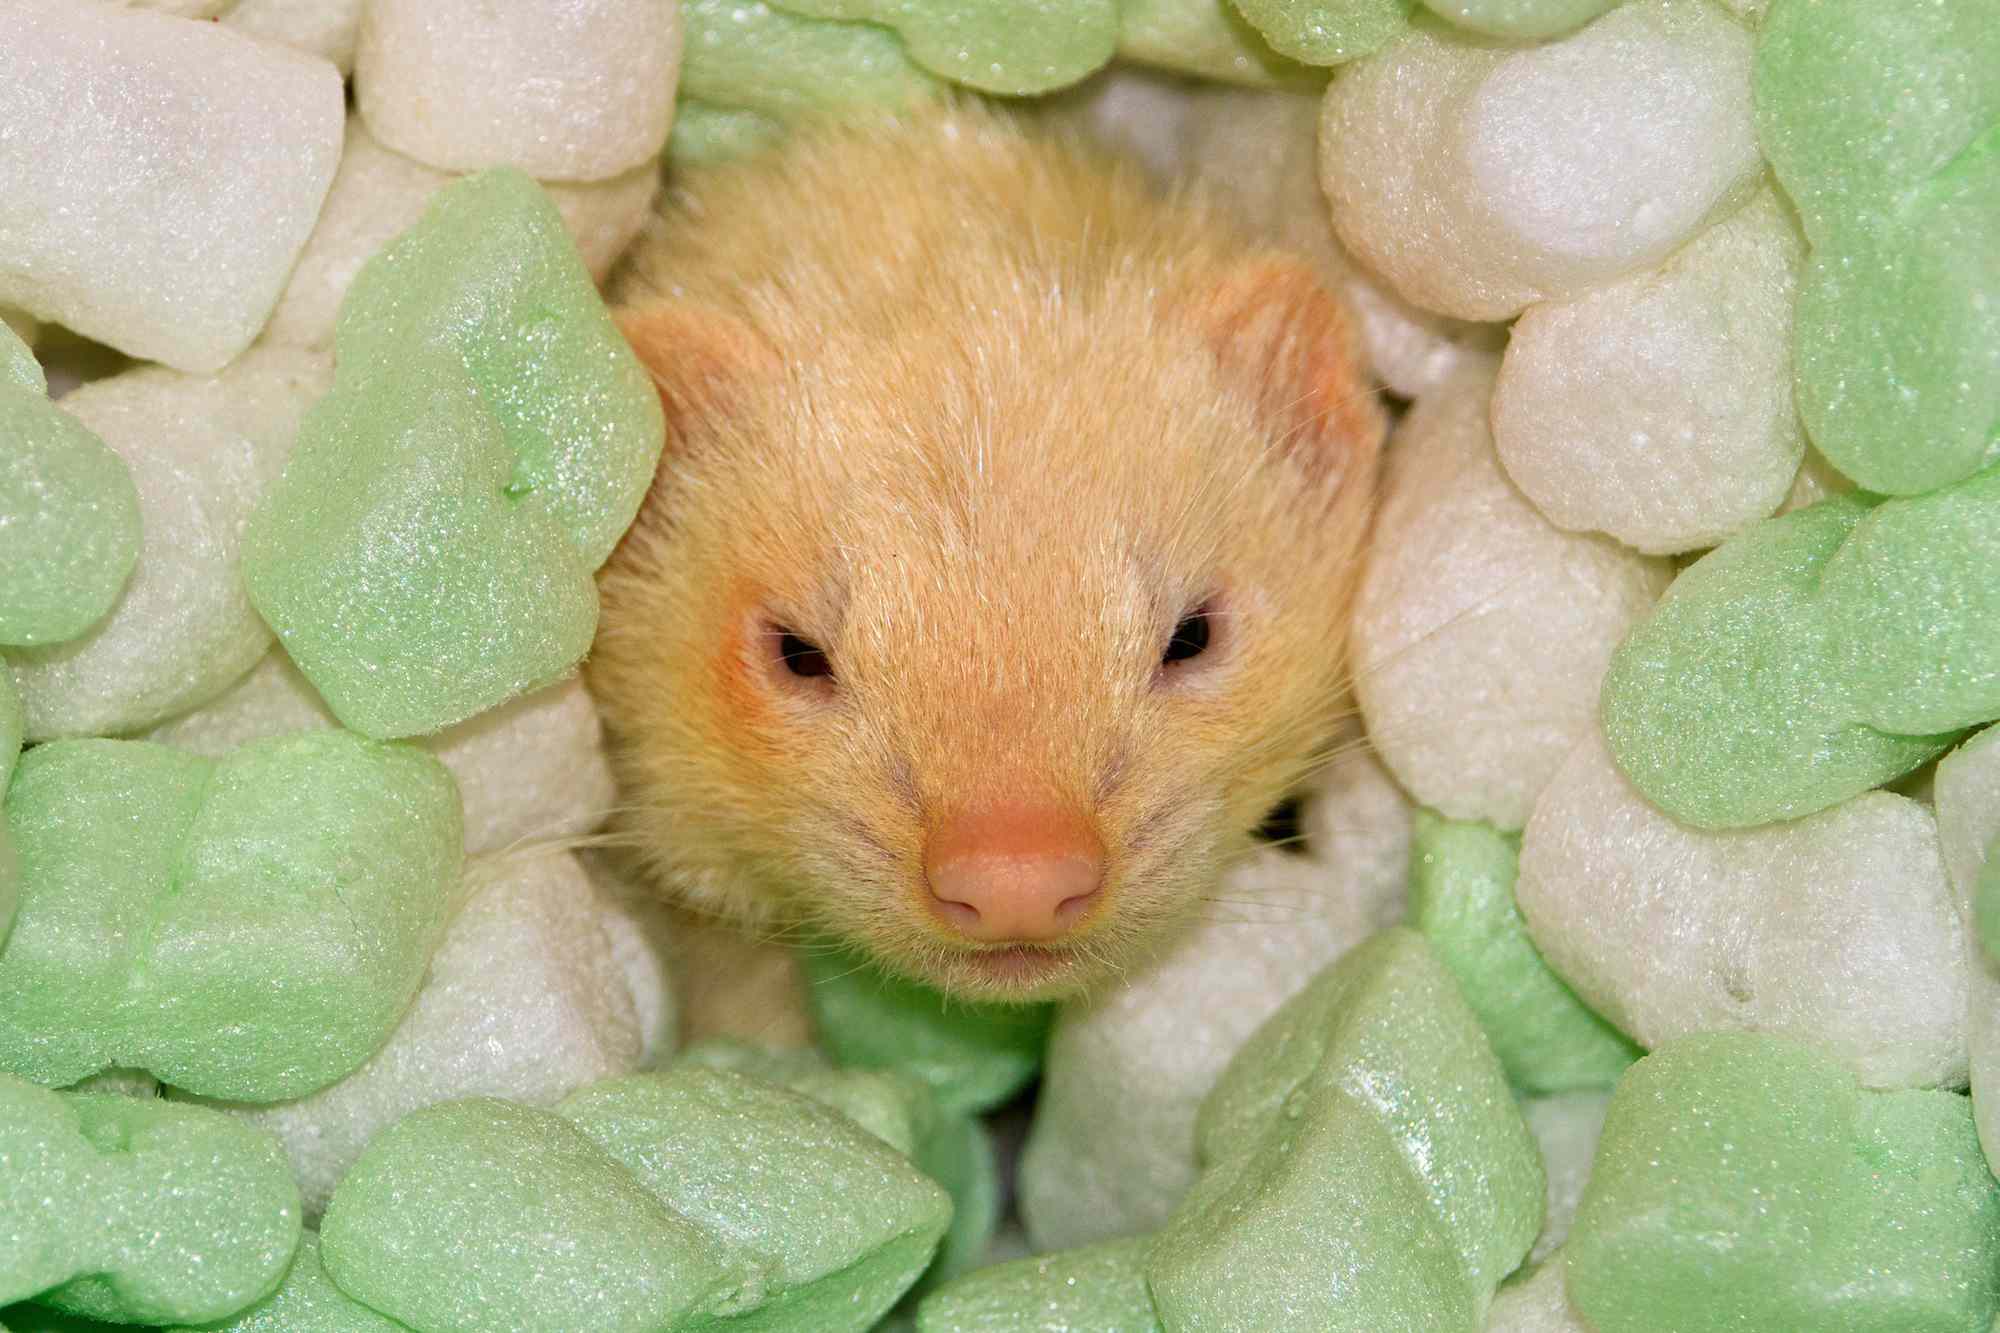 Ferret in packing peanuts